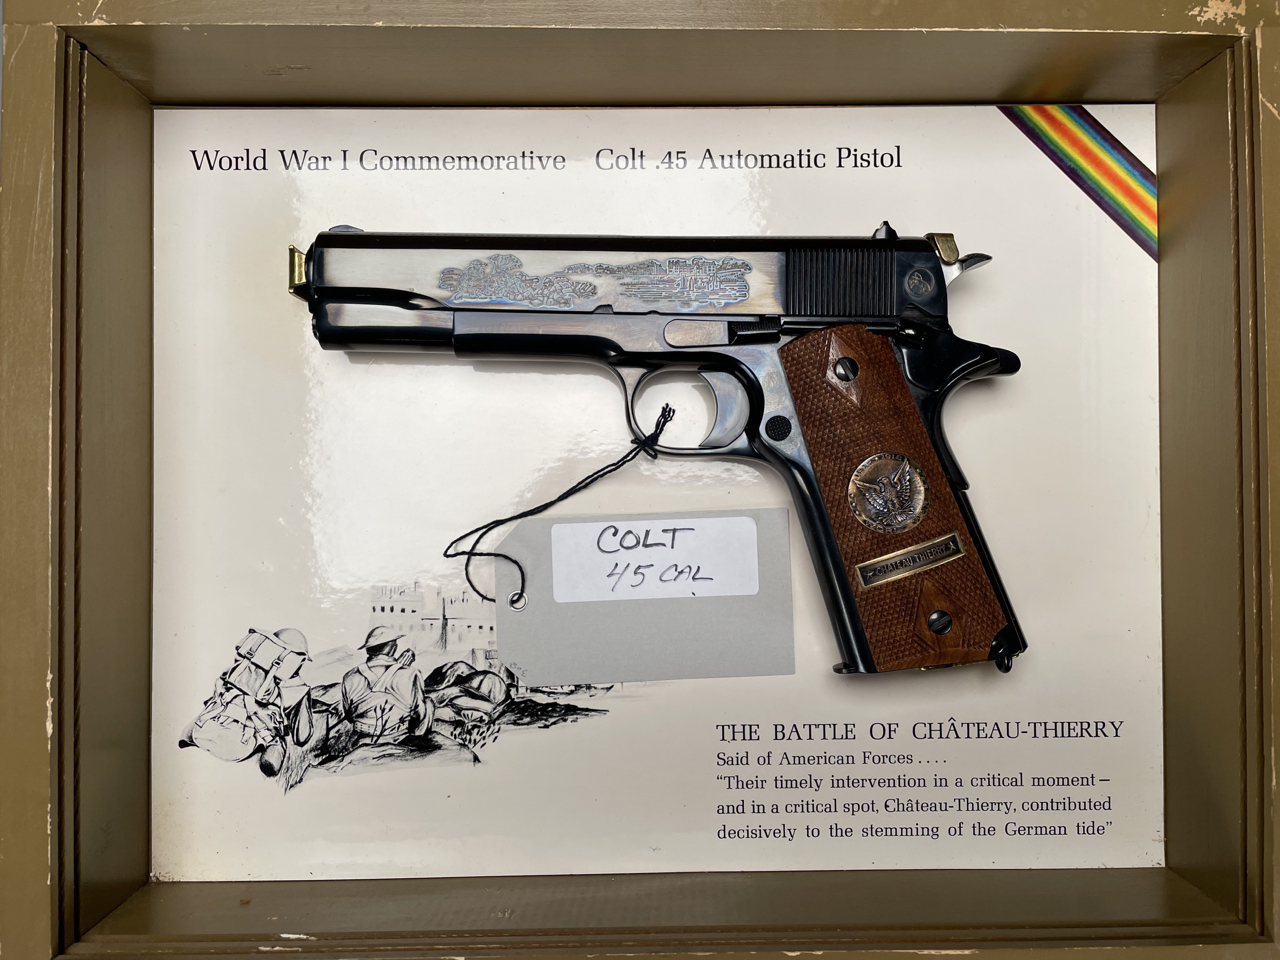 FIREARMS AUCTION - FEB. 10 AT 6 P.M.